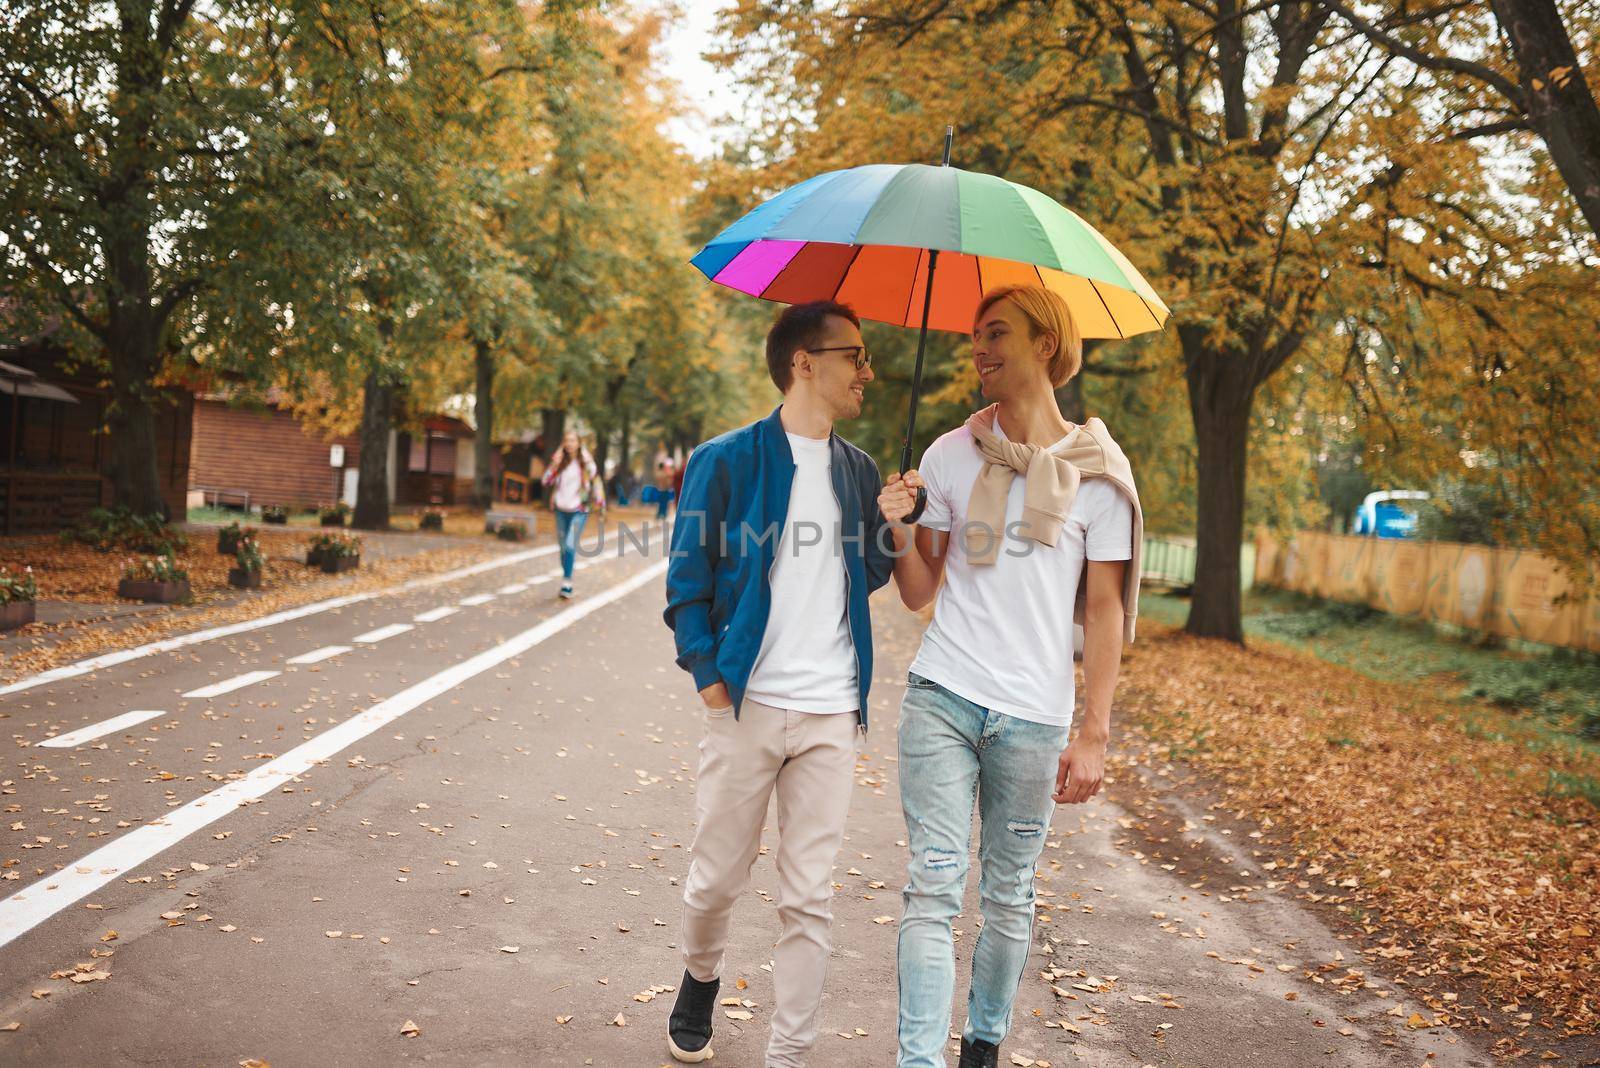 Loving gay couple walking outdoors with rainbow umbrella. Two handsome men having romantic date in park. LGBT concept.